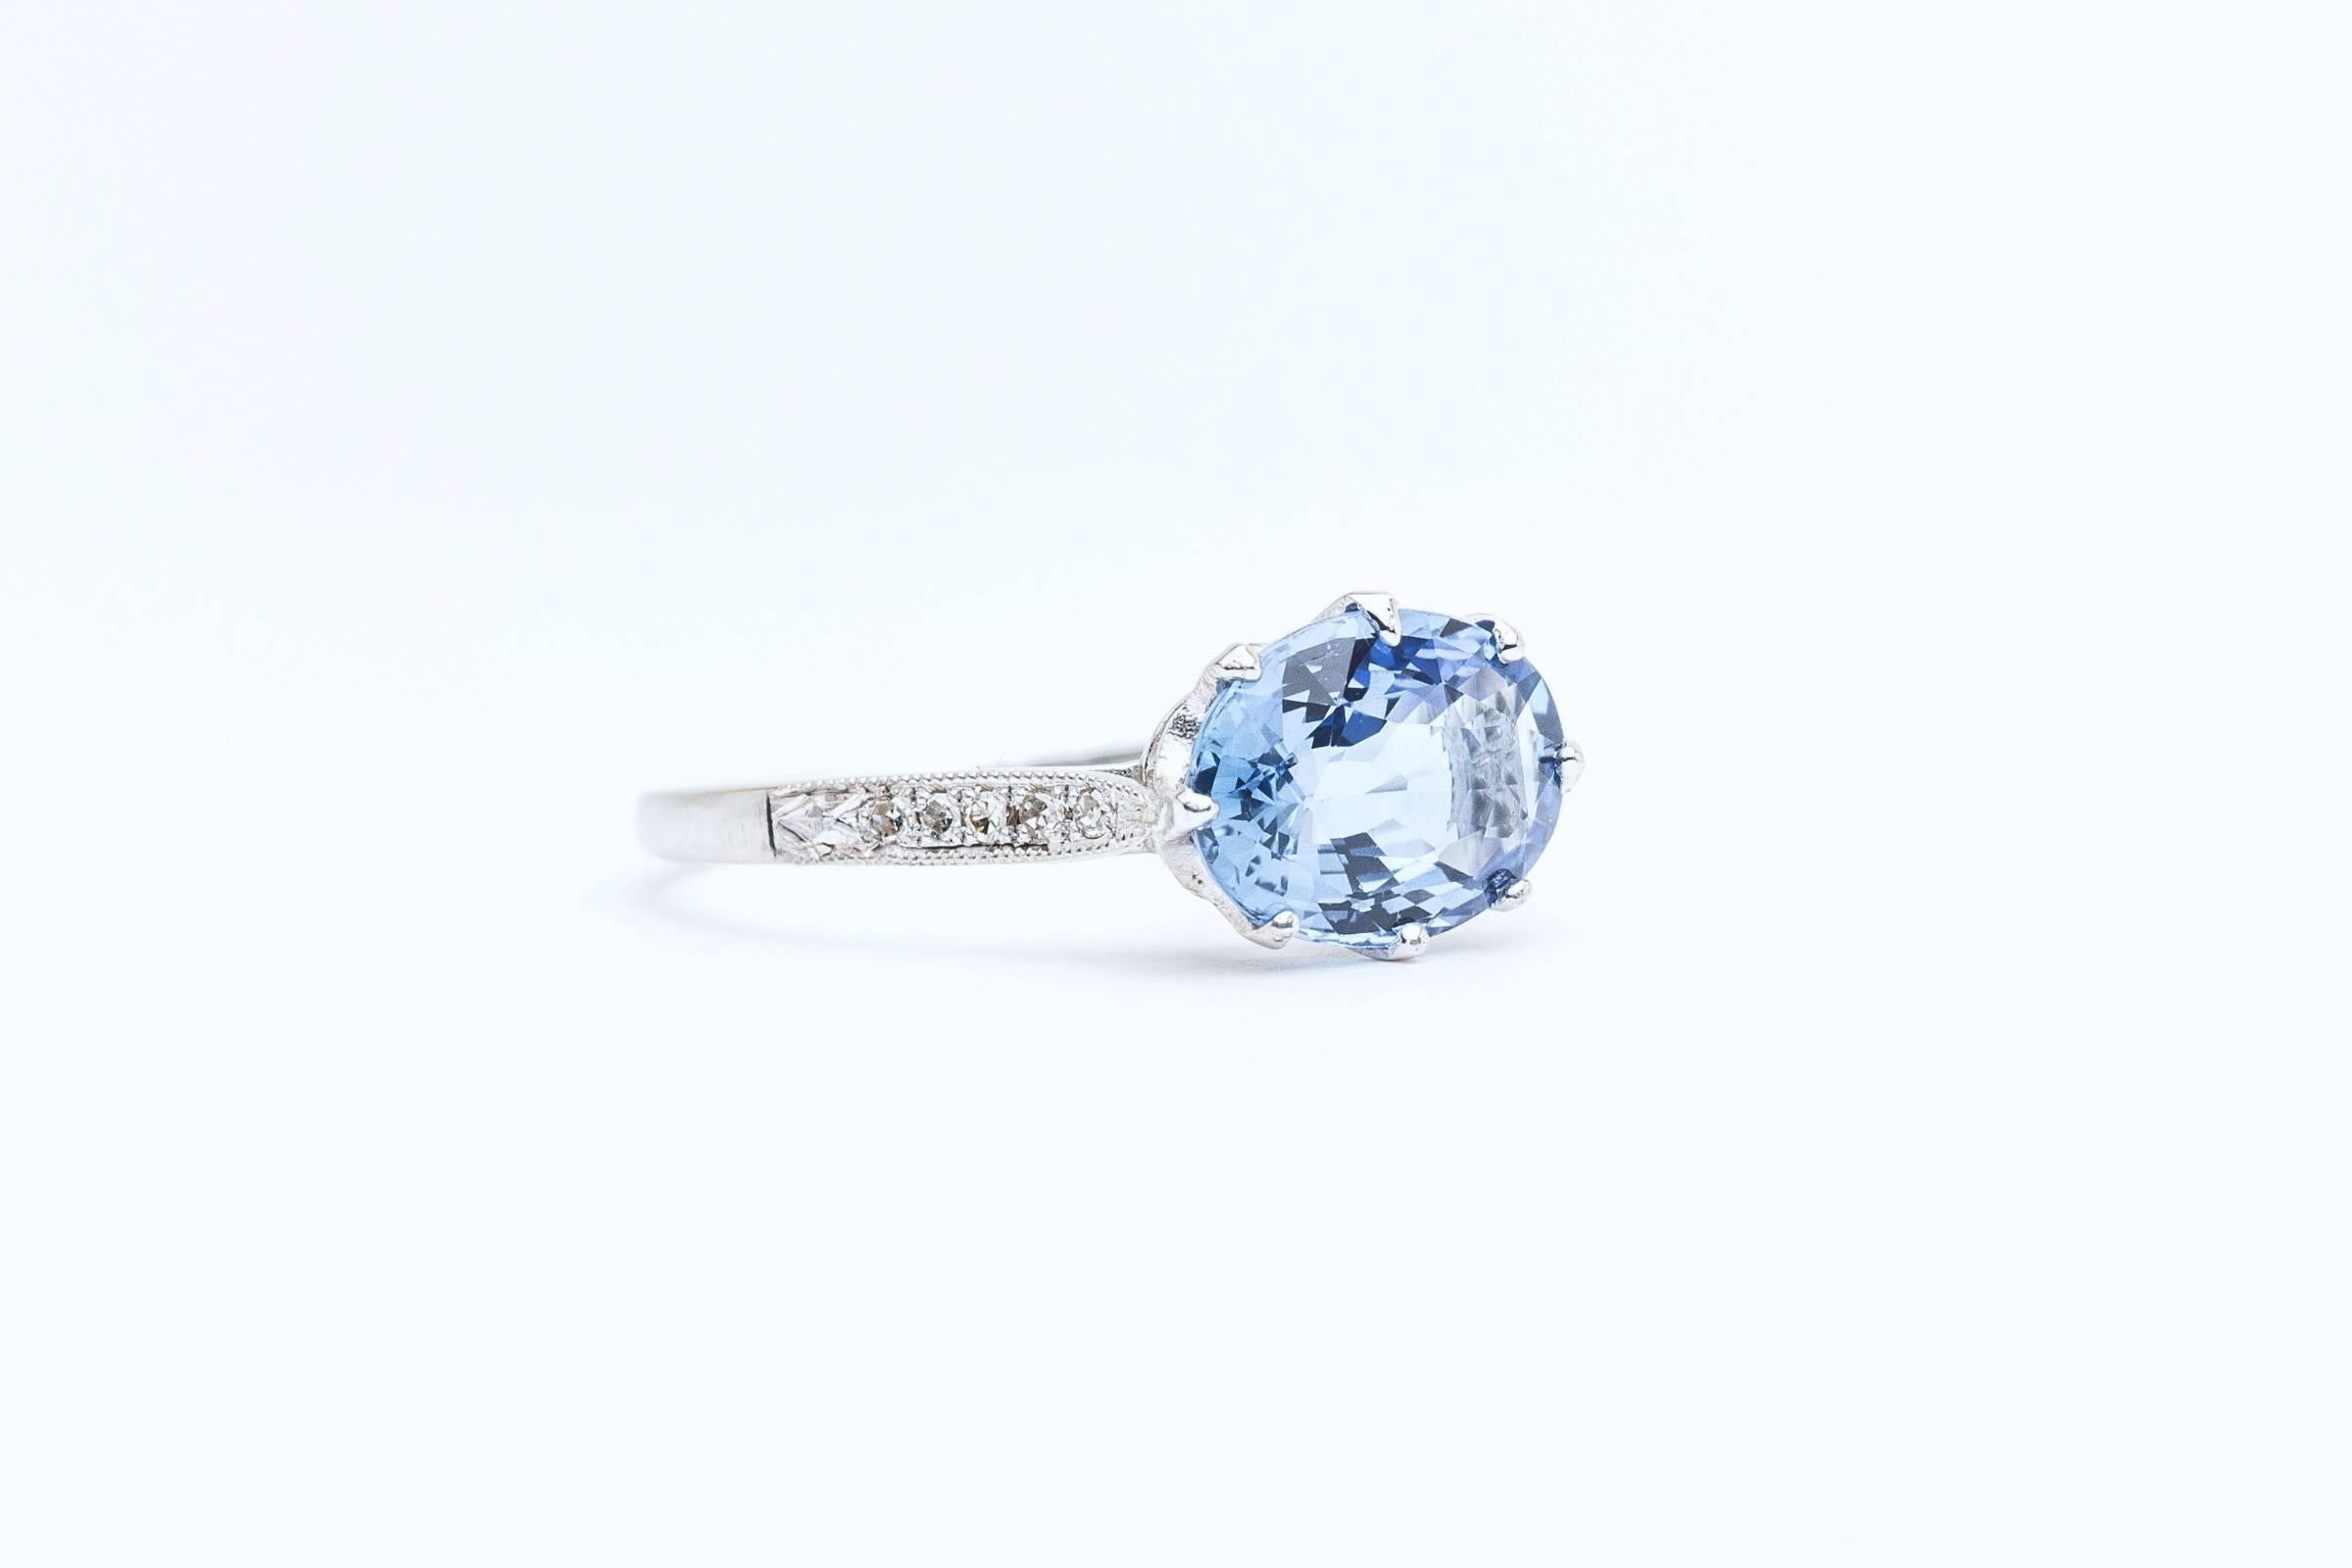 A beautiful sapphire and diamond ring in luxurious platinum. Centered by a fantastic vivid blue Ceylon sapphire this ring features a delightful hand crafted platinum mounting accented by ten pave set diamonds, and beautiful hand engraving.

Of